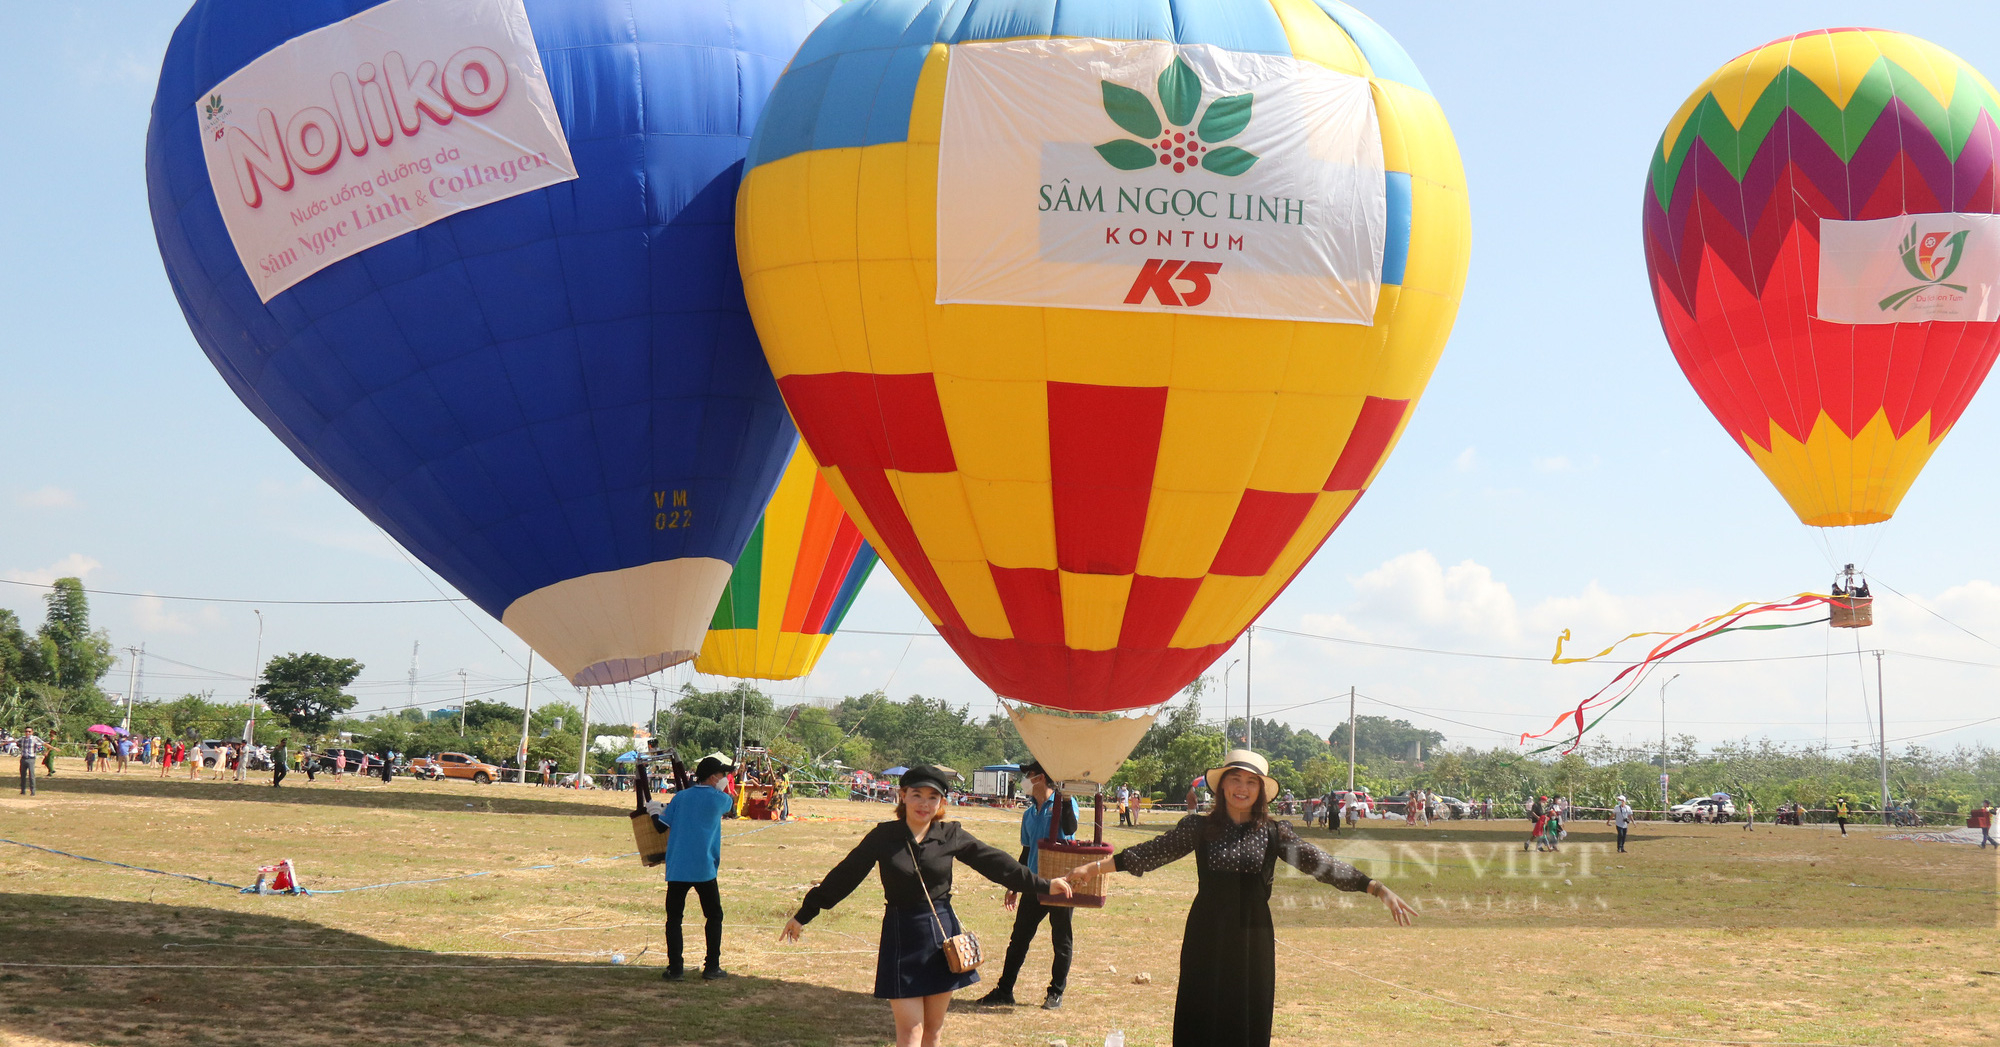 Dozens of hot air balloons carrying tourists for the first time flew in the sky of Kon Tum